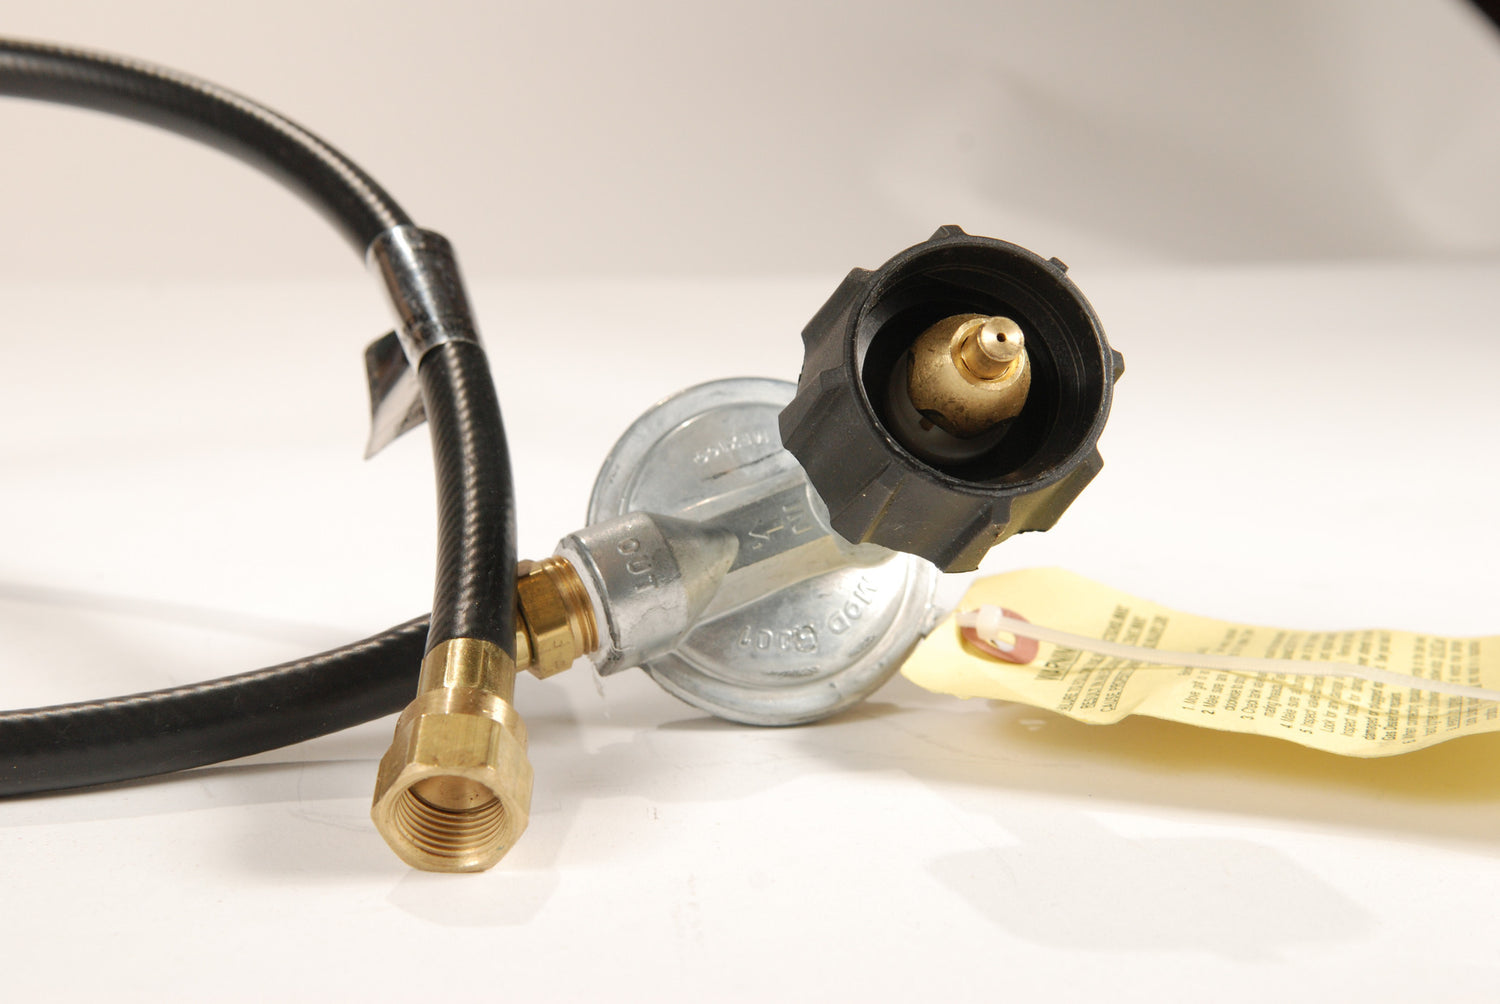 CSA Approved QCC1 Propane Hose and Regulator